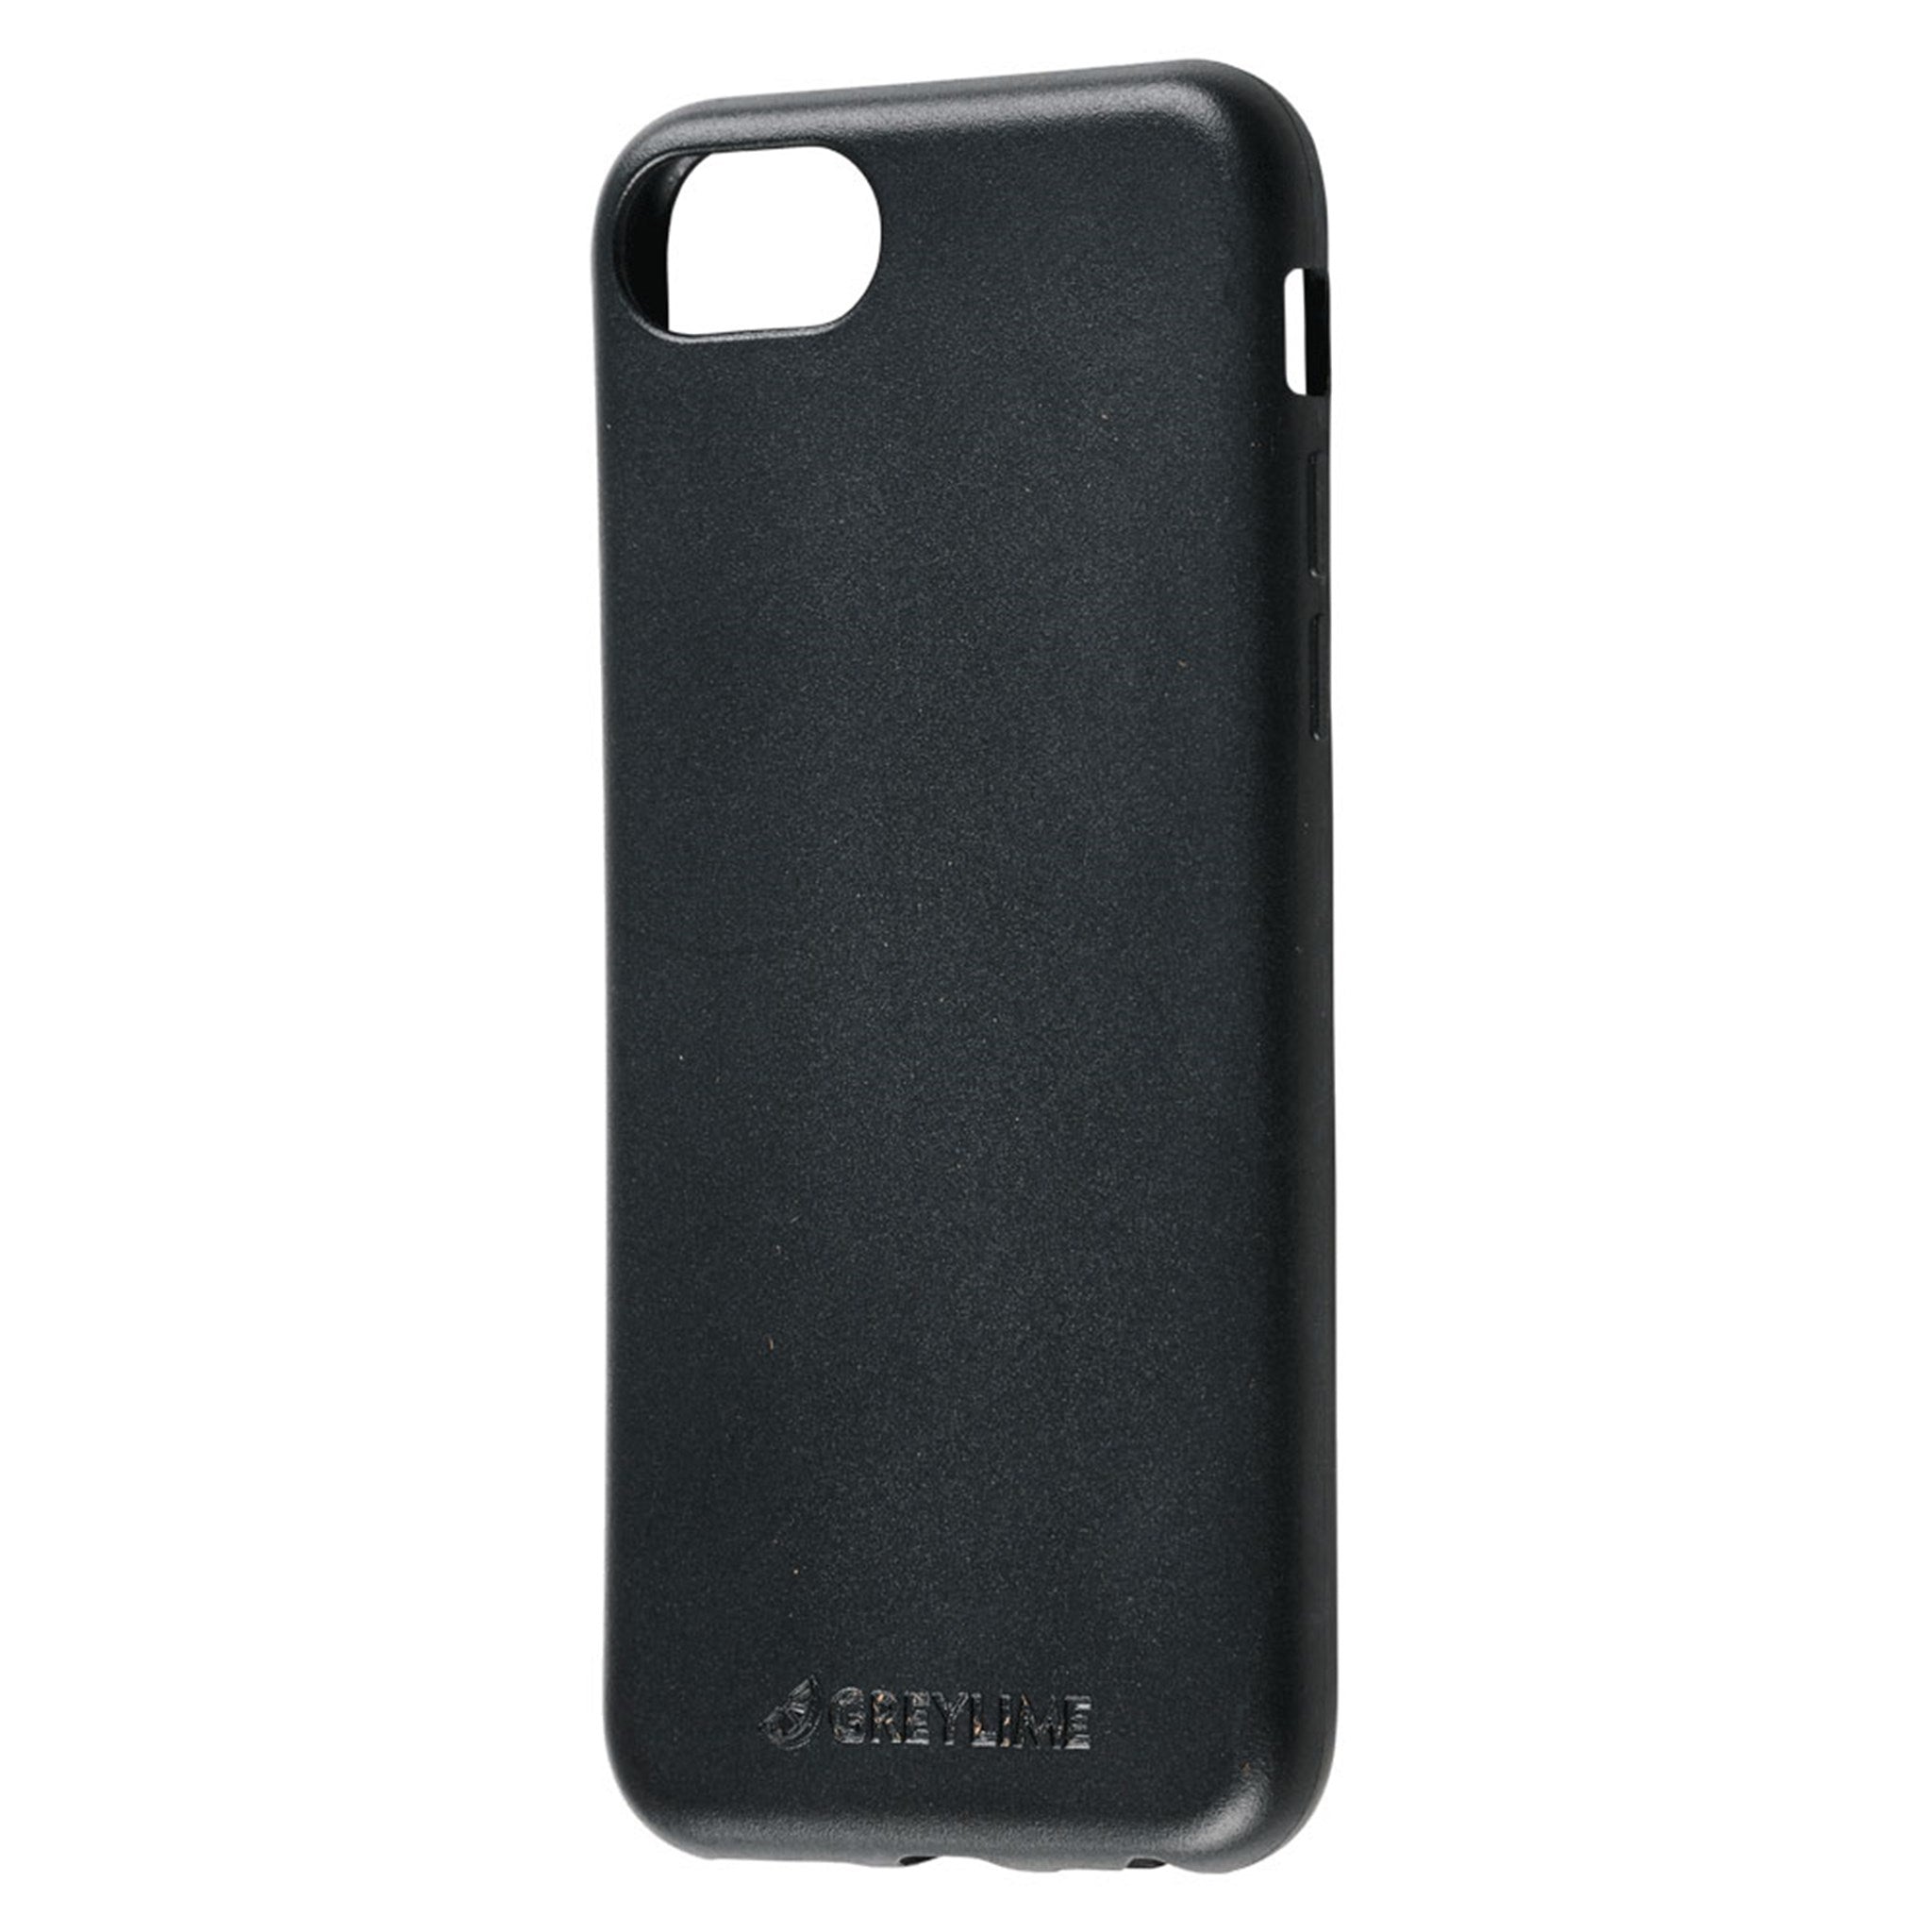 GreyLime-iPhone-6-7-8-Plus-biodegradable-cover-Black-COIP678P01-V2.jpg